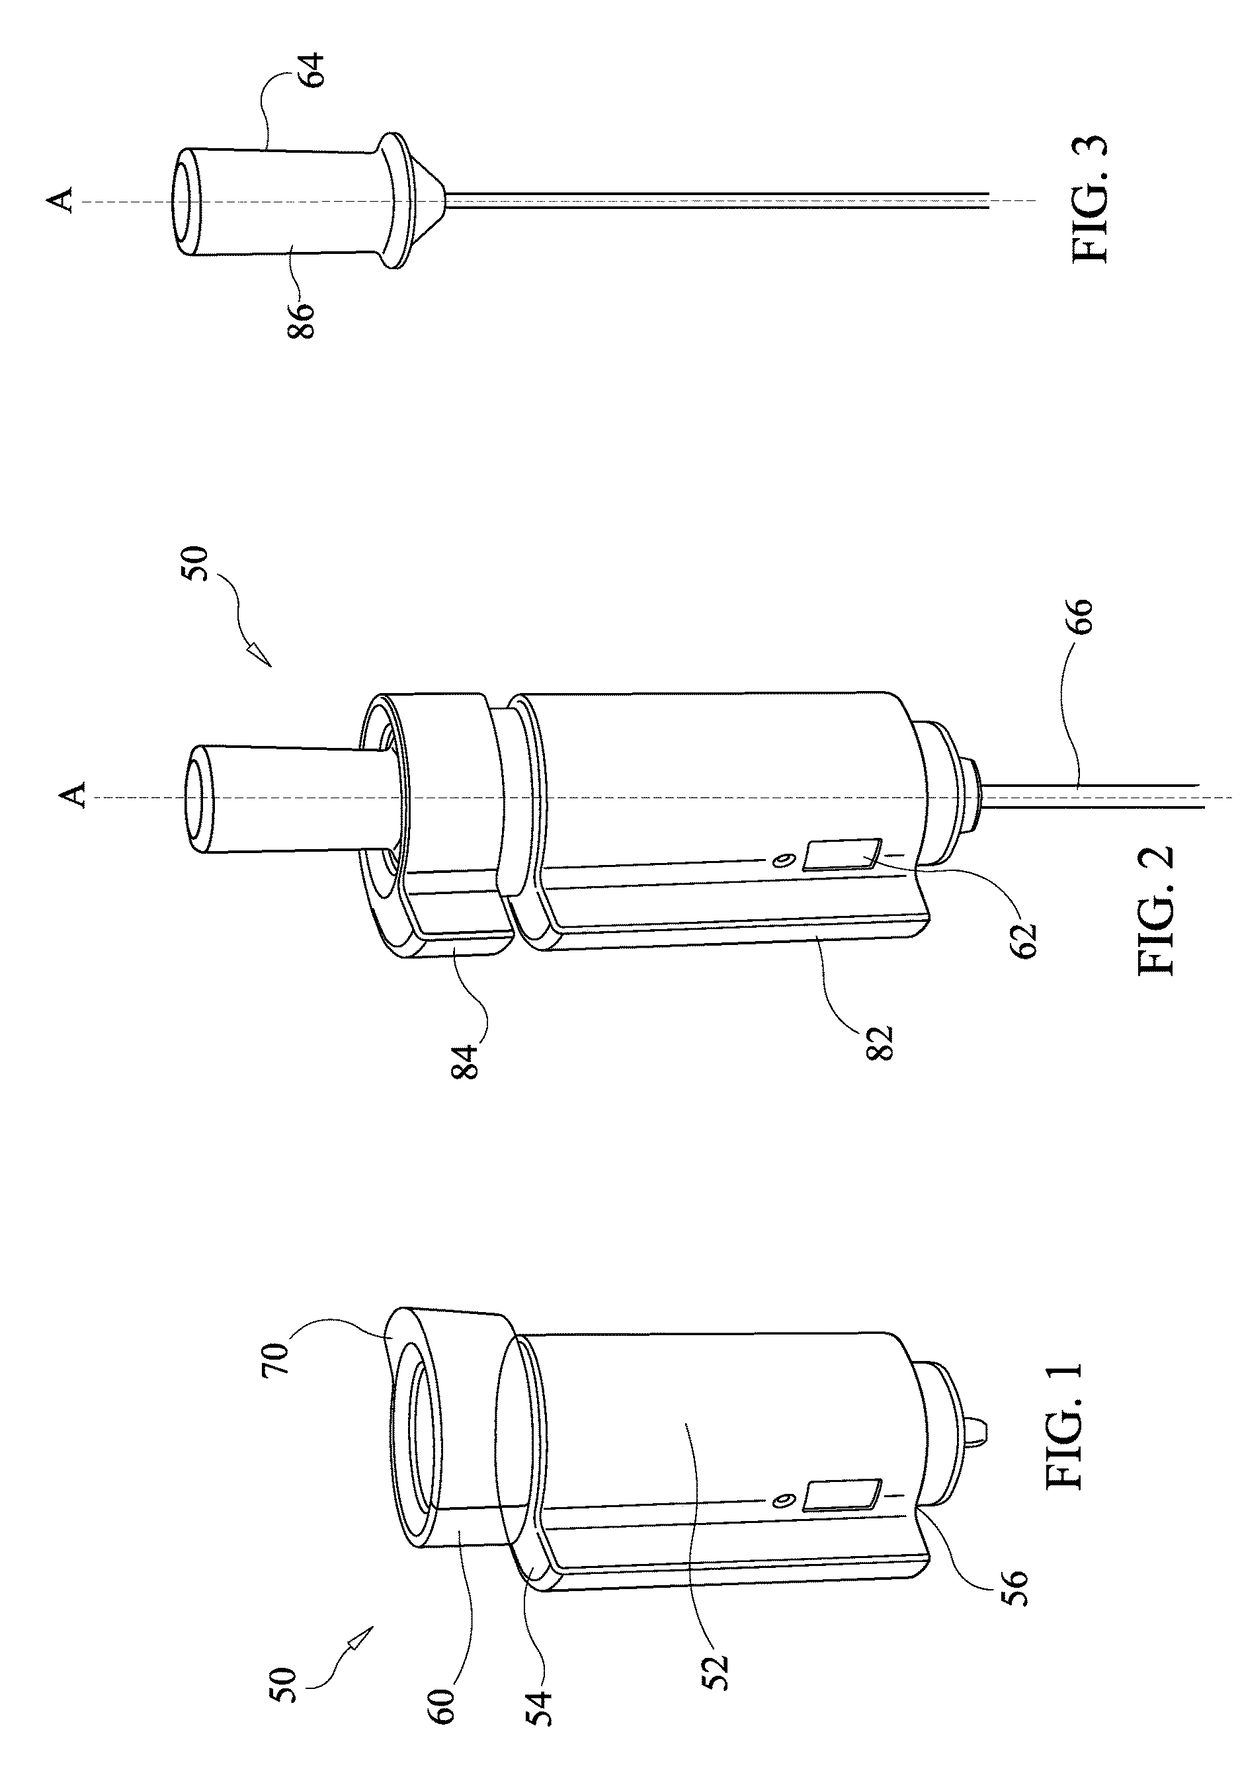 Drug delivery device with retaining member